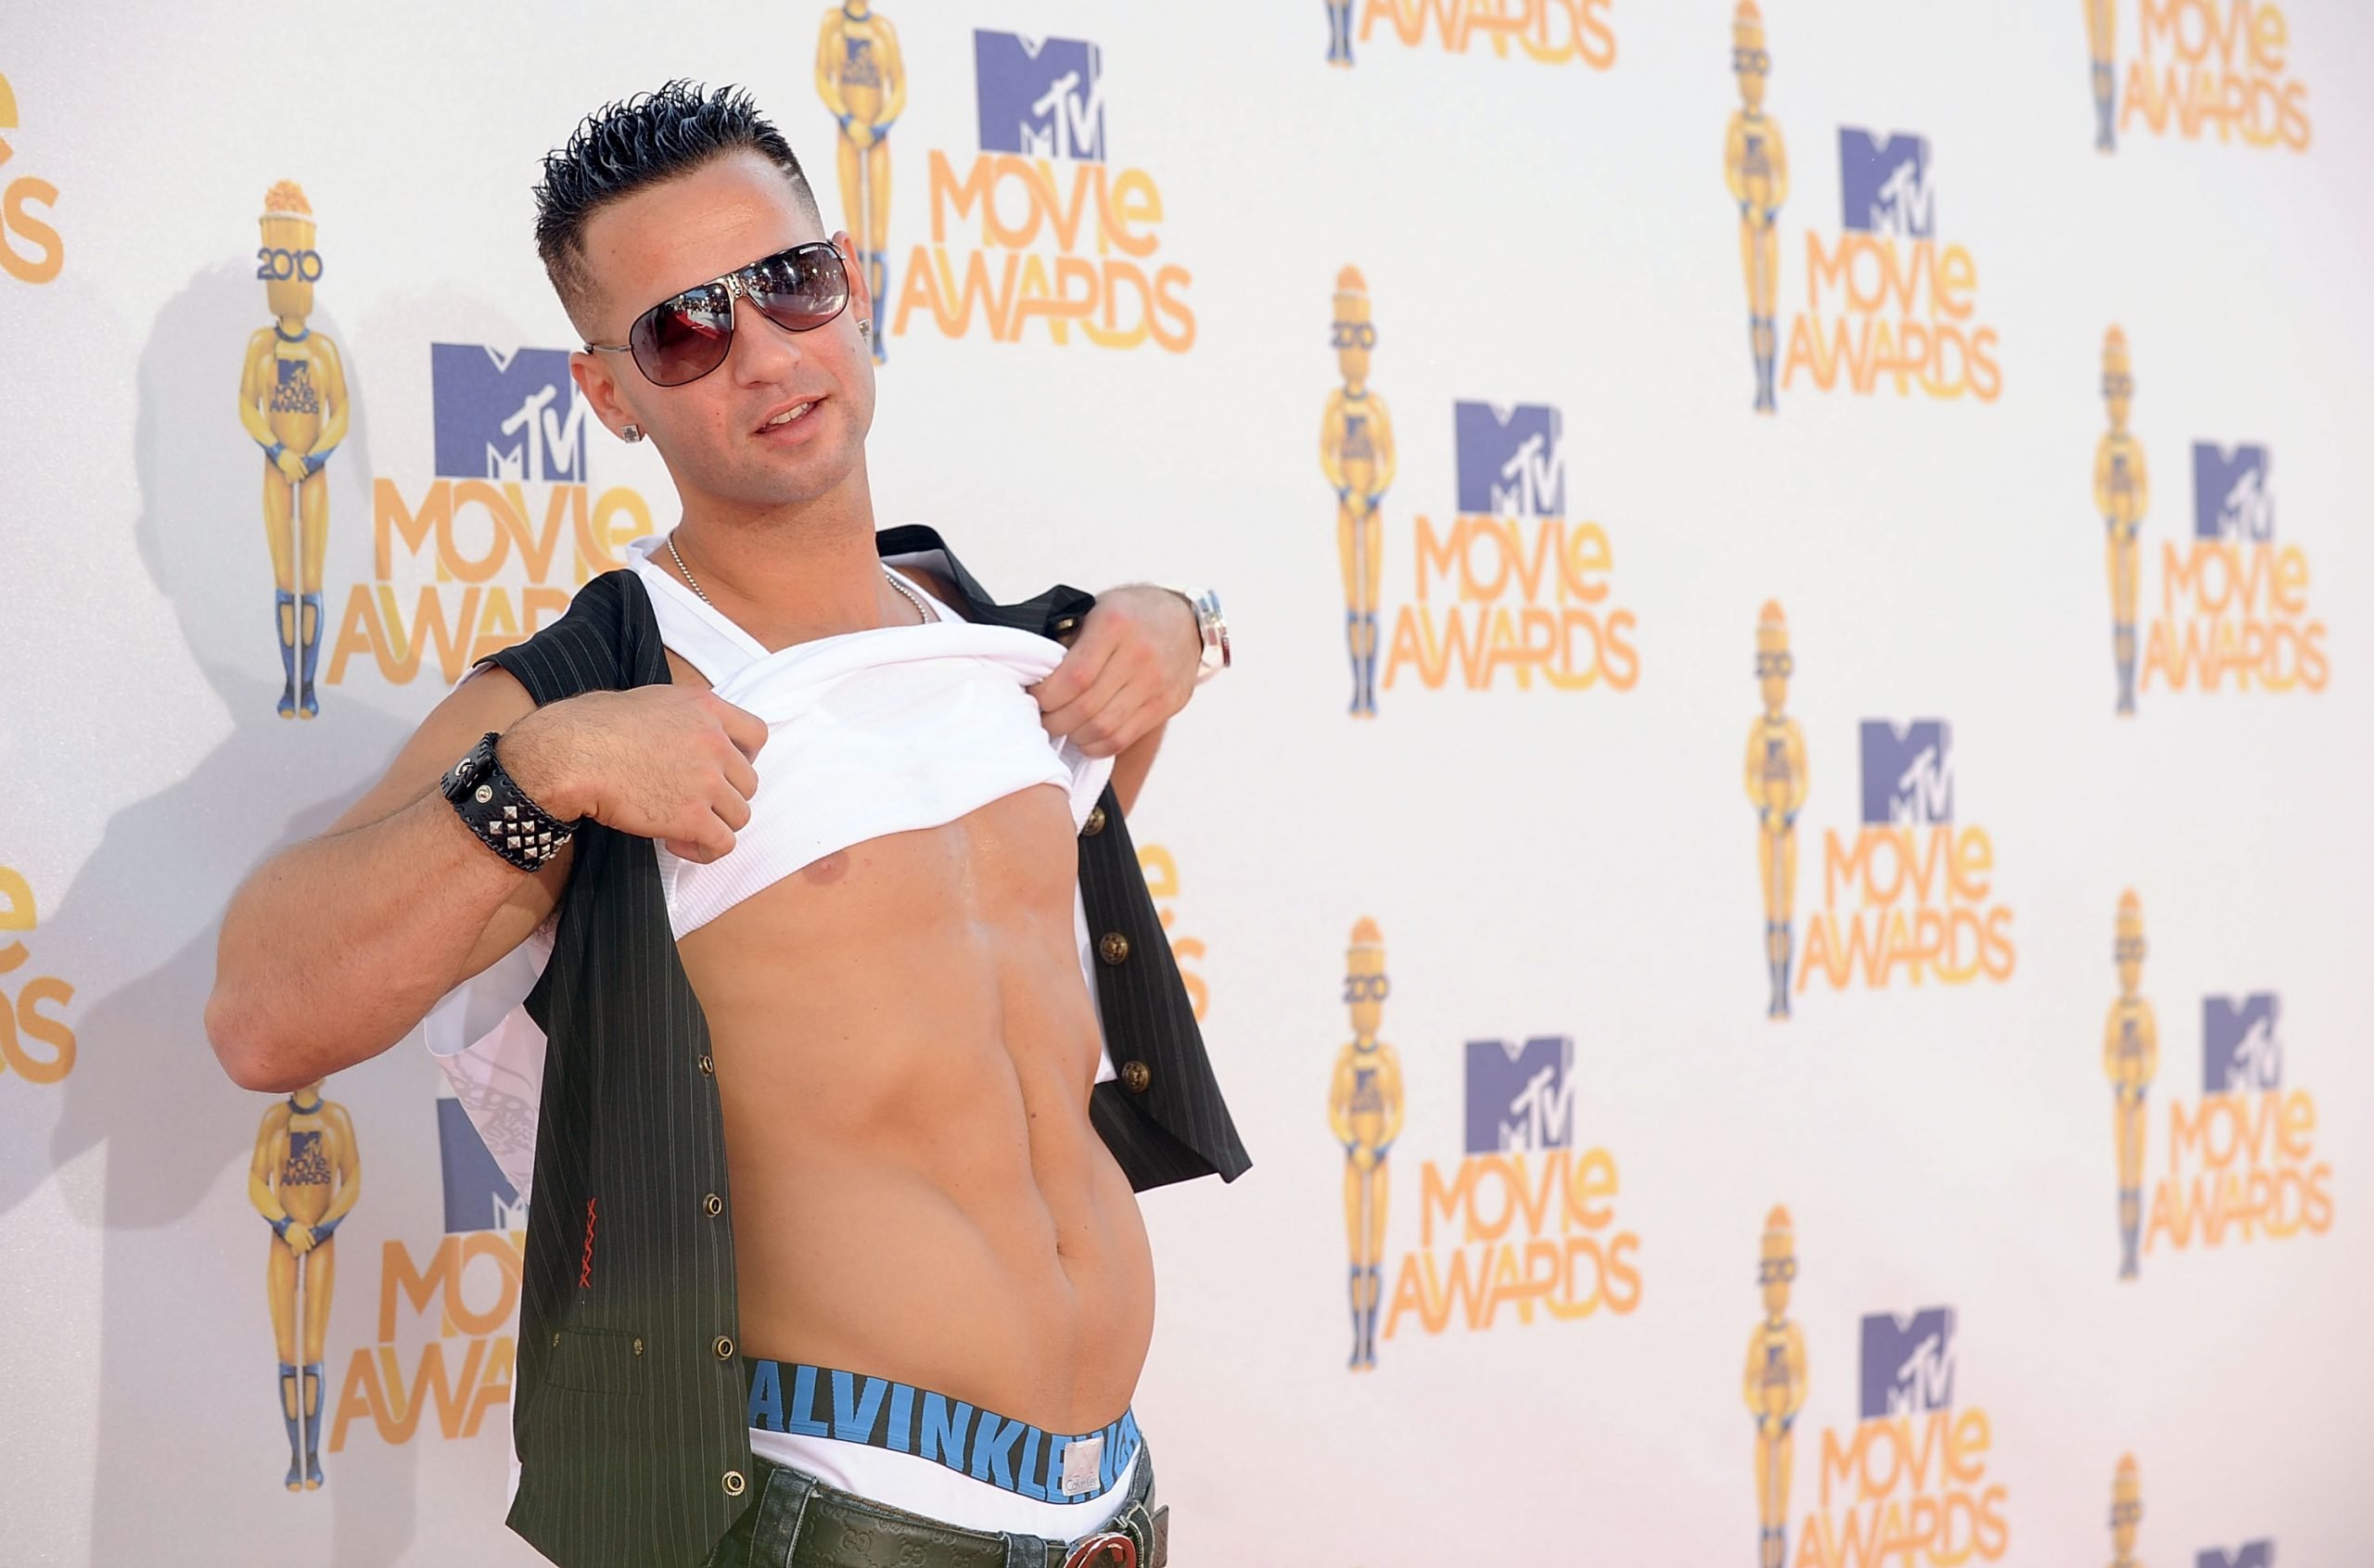 Mike ‘The Situation’ Sorrentino Got His Nickname From a Random Woman at a Club